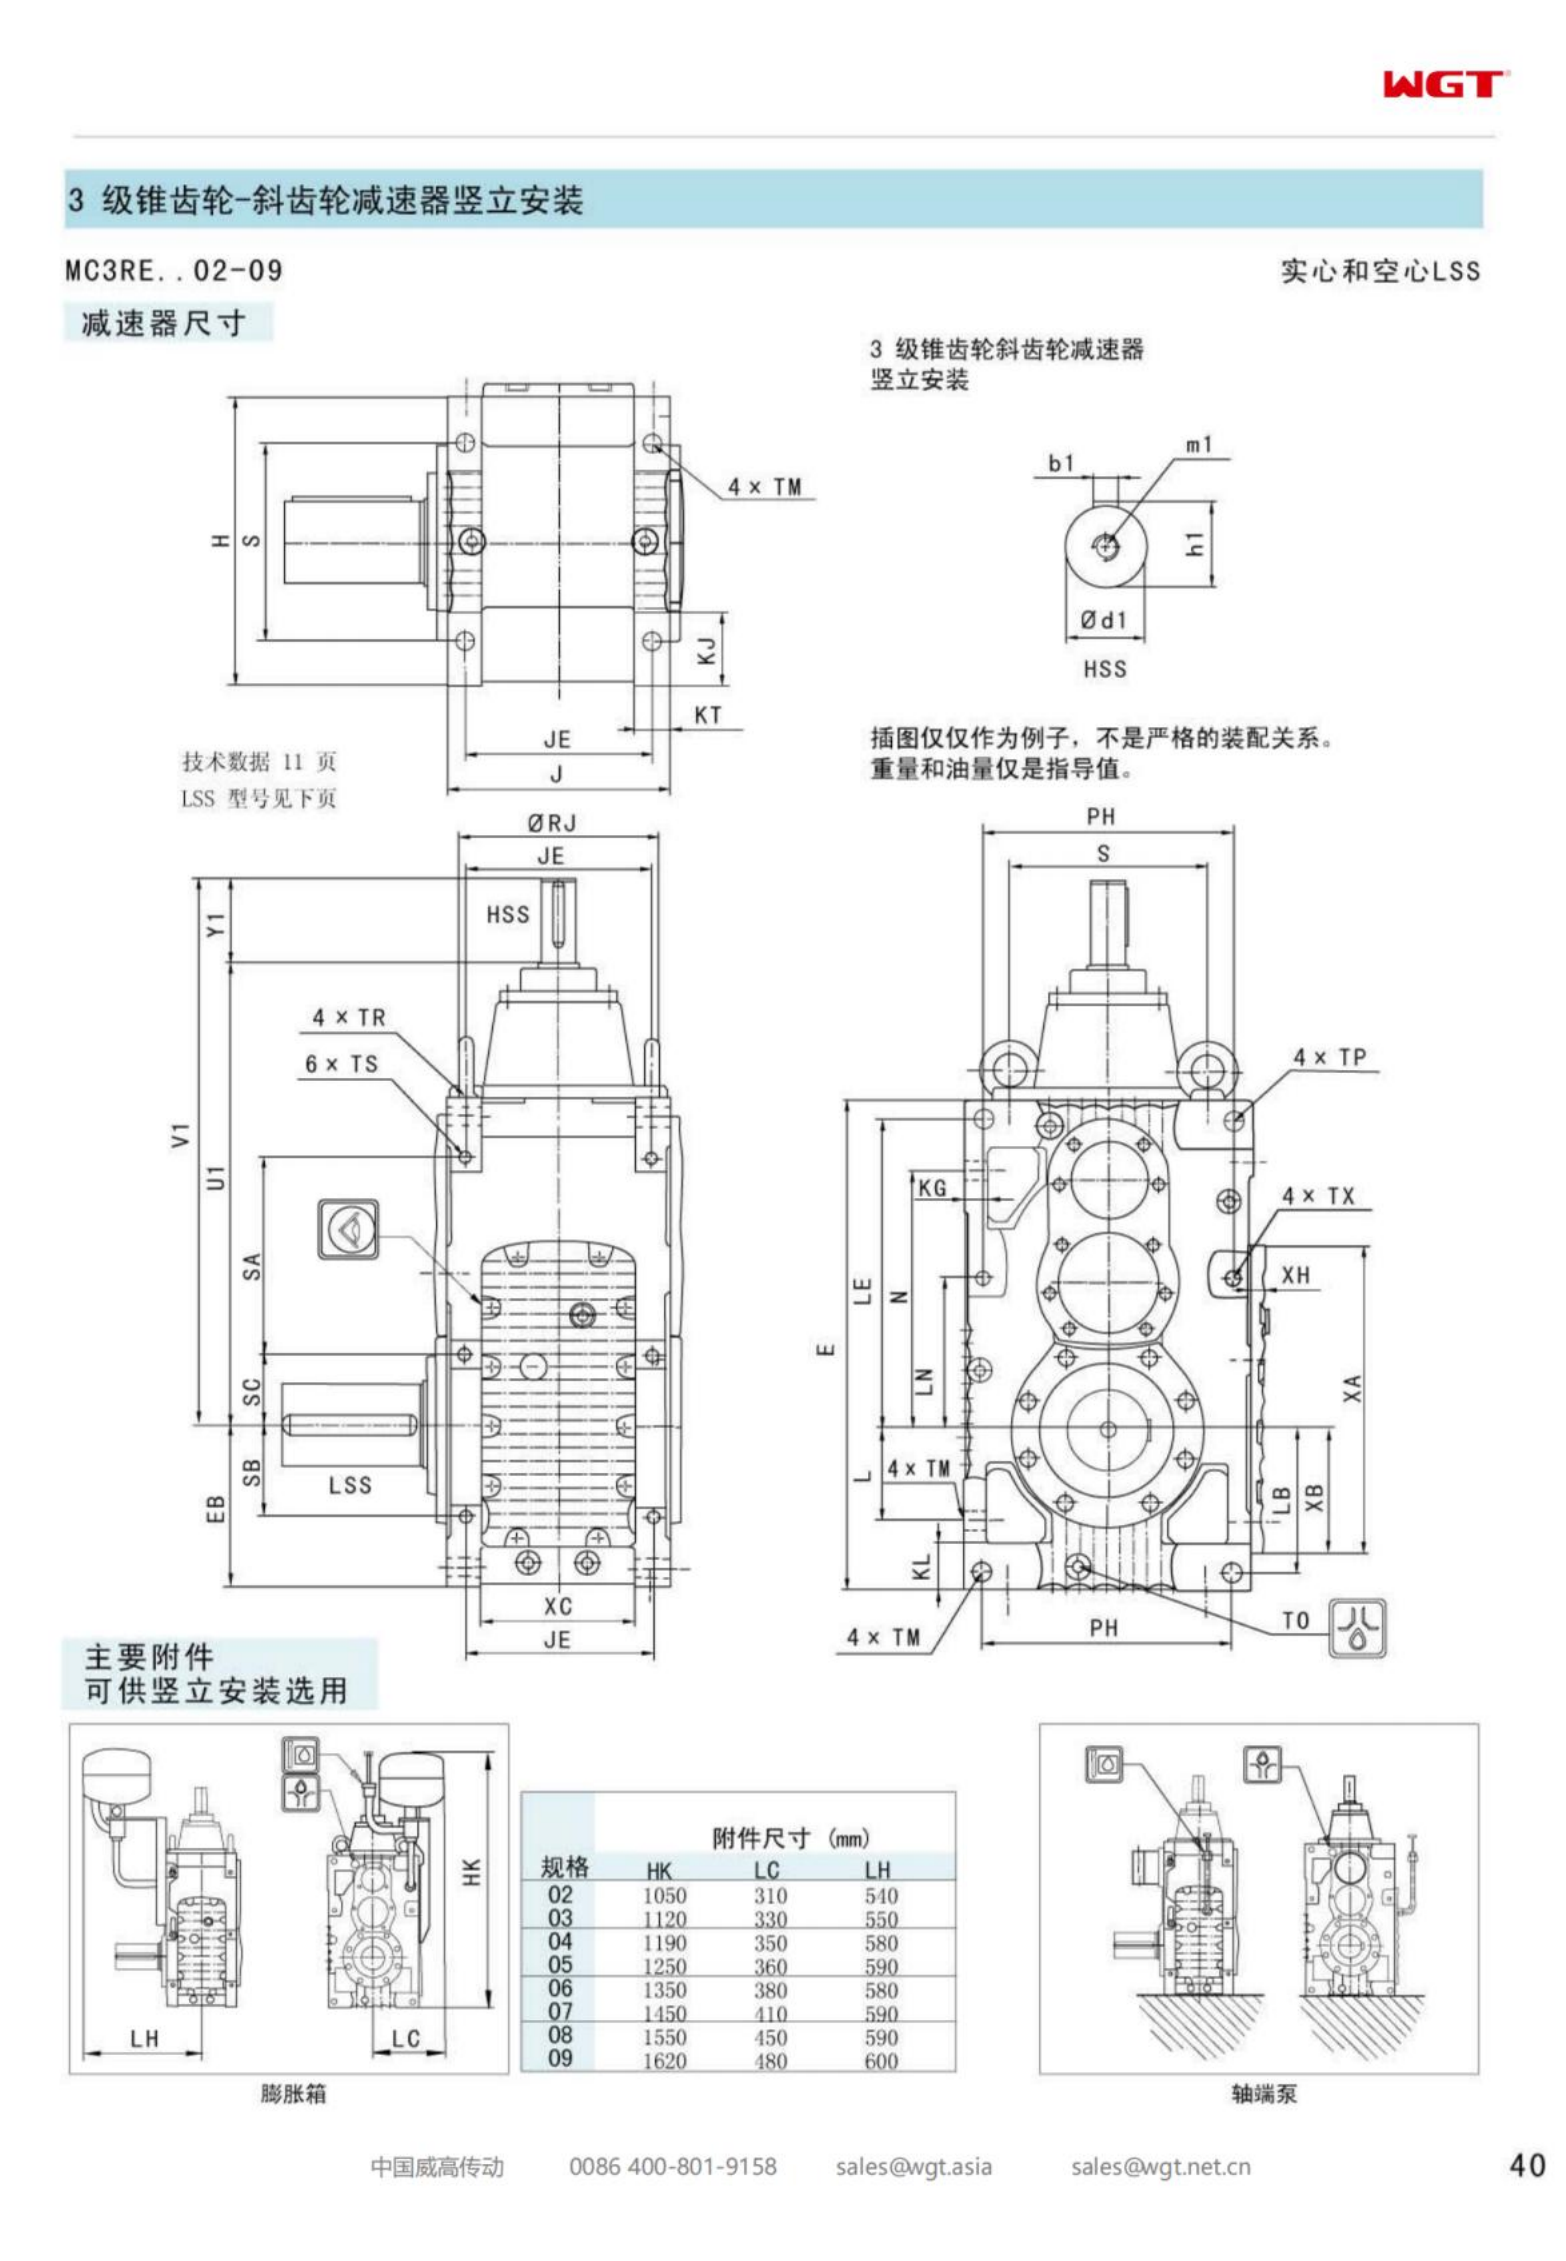 MC3RESF03 Replace_SEW_MC_Series Gearbox